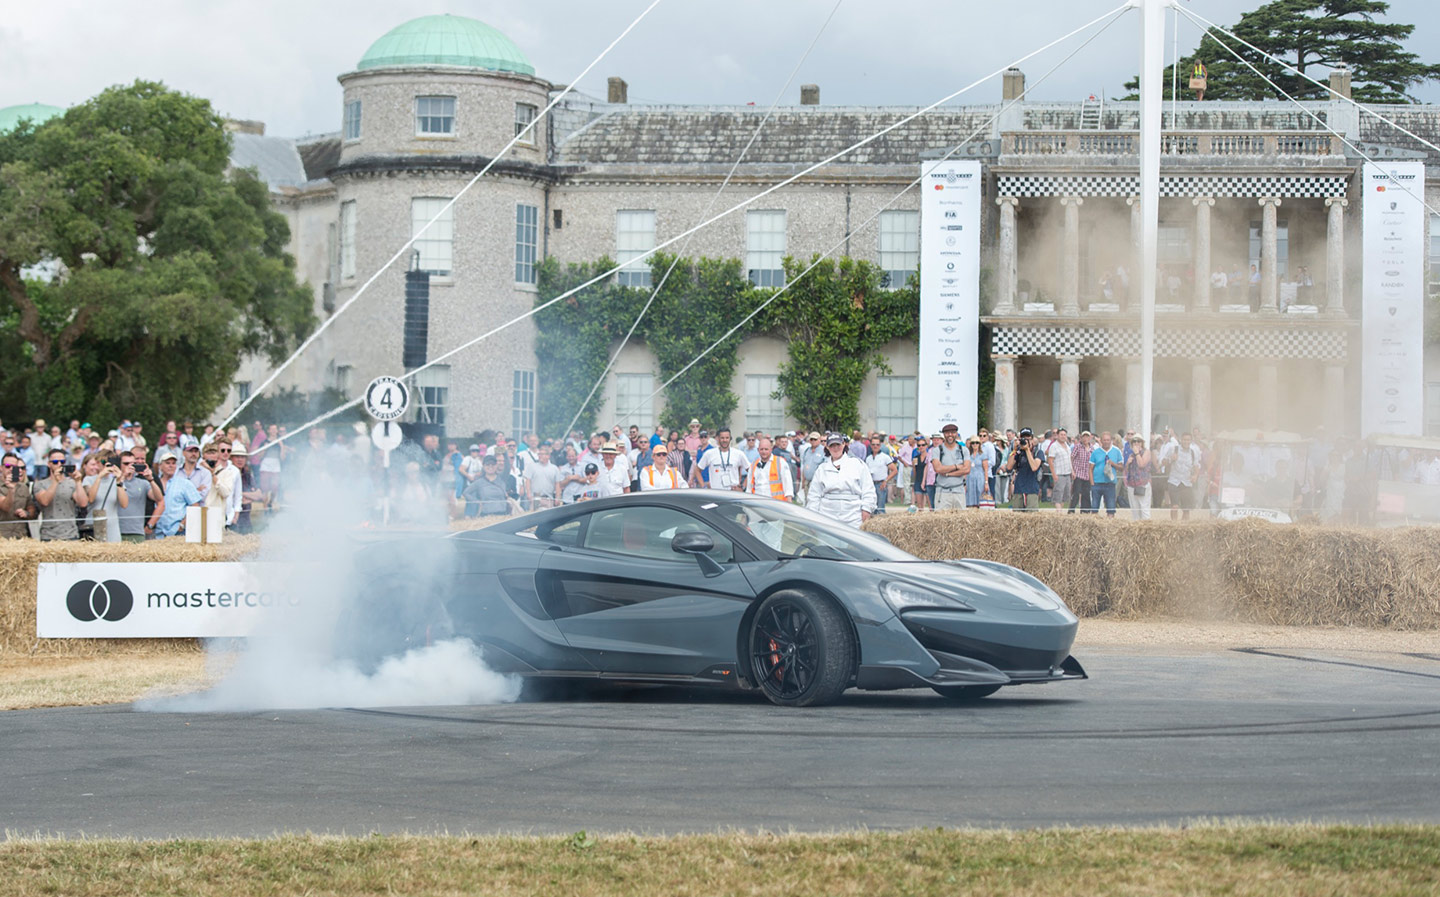 Best British cars revealed at 2018 Goodwood Festival of Speed